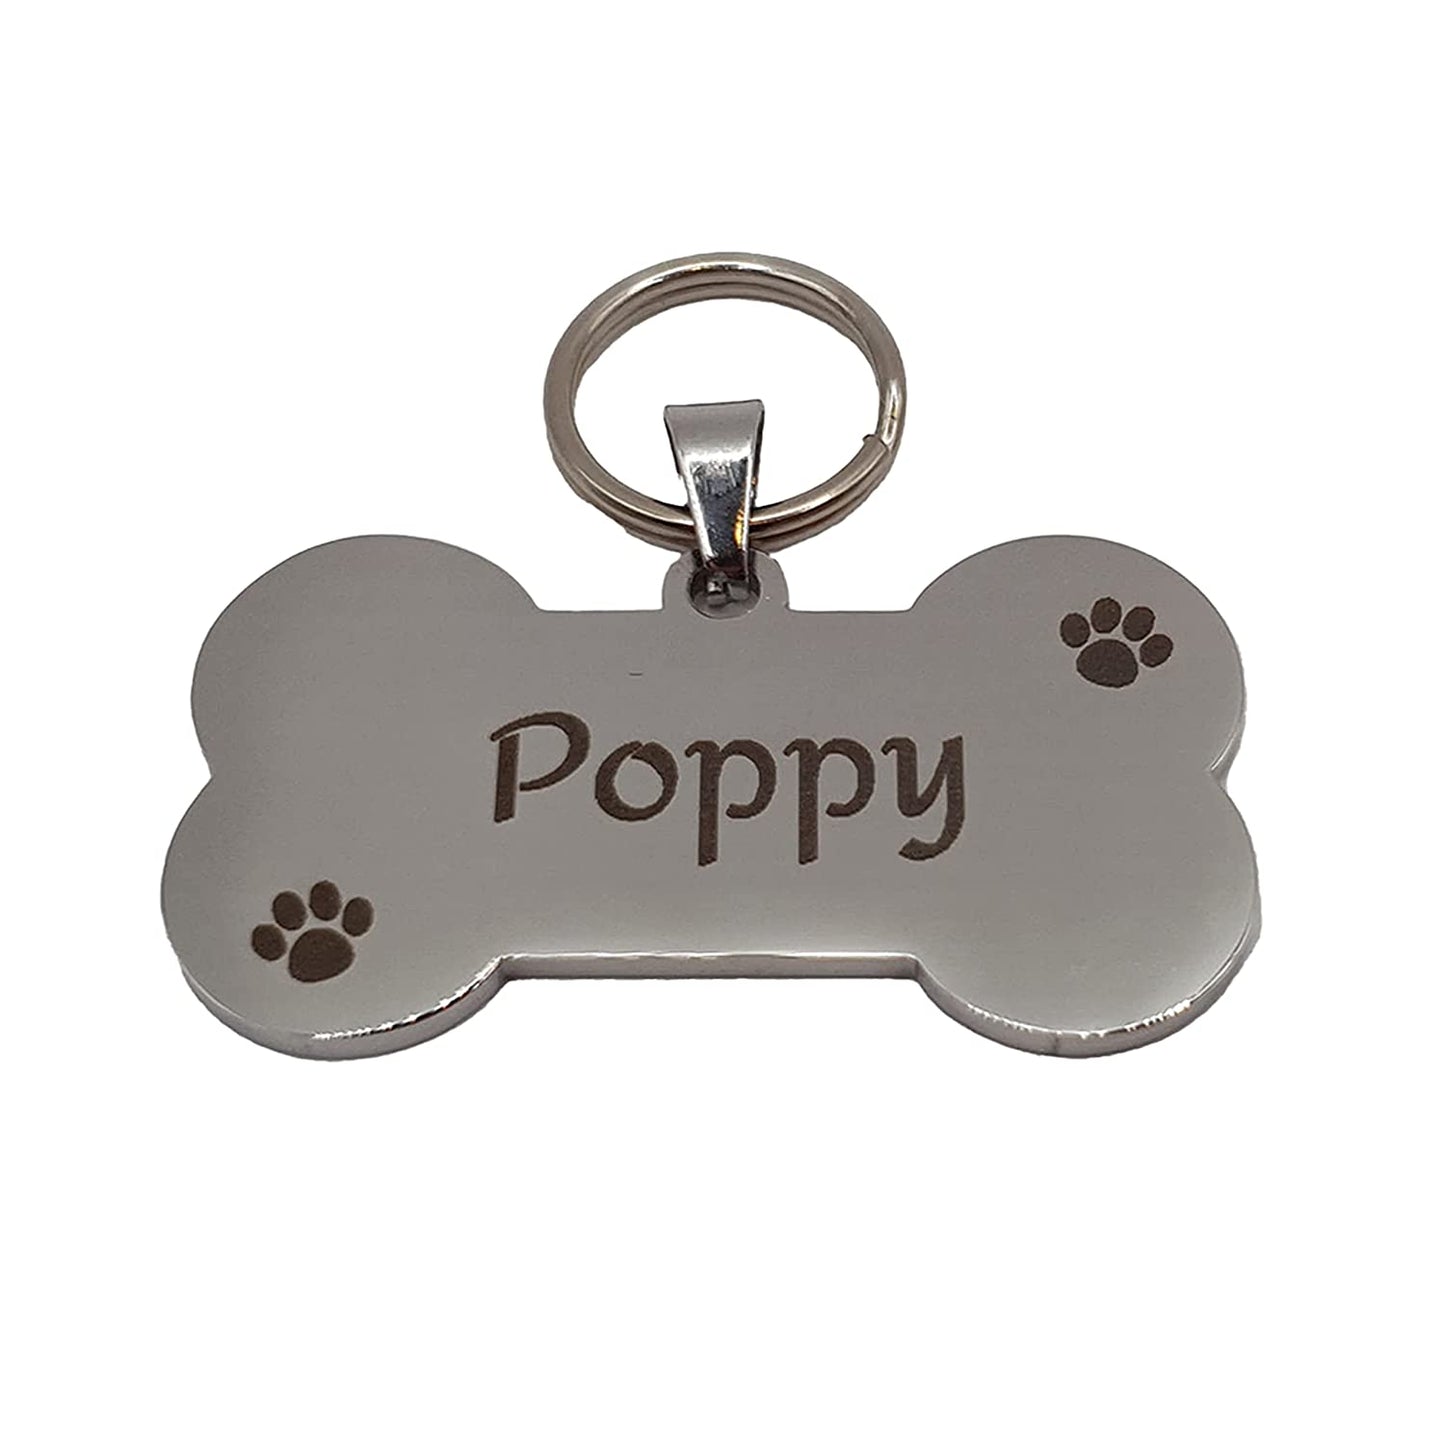 Engraved Dog Tag - Stainless Steel Bone Shape with Paw Prints- Personalised with Name and Contact Info - Pet ID Collar Accessory